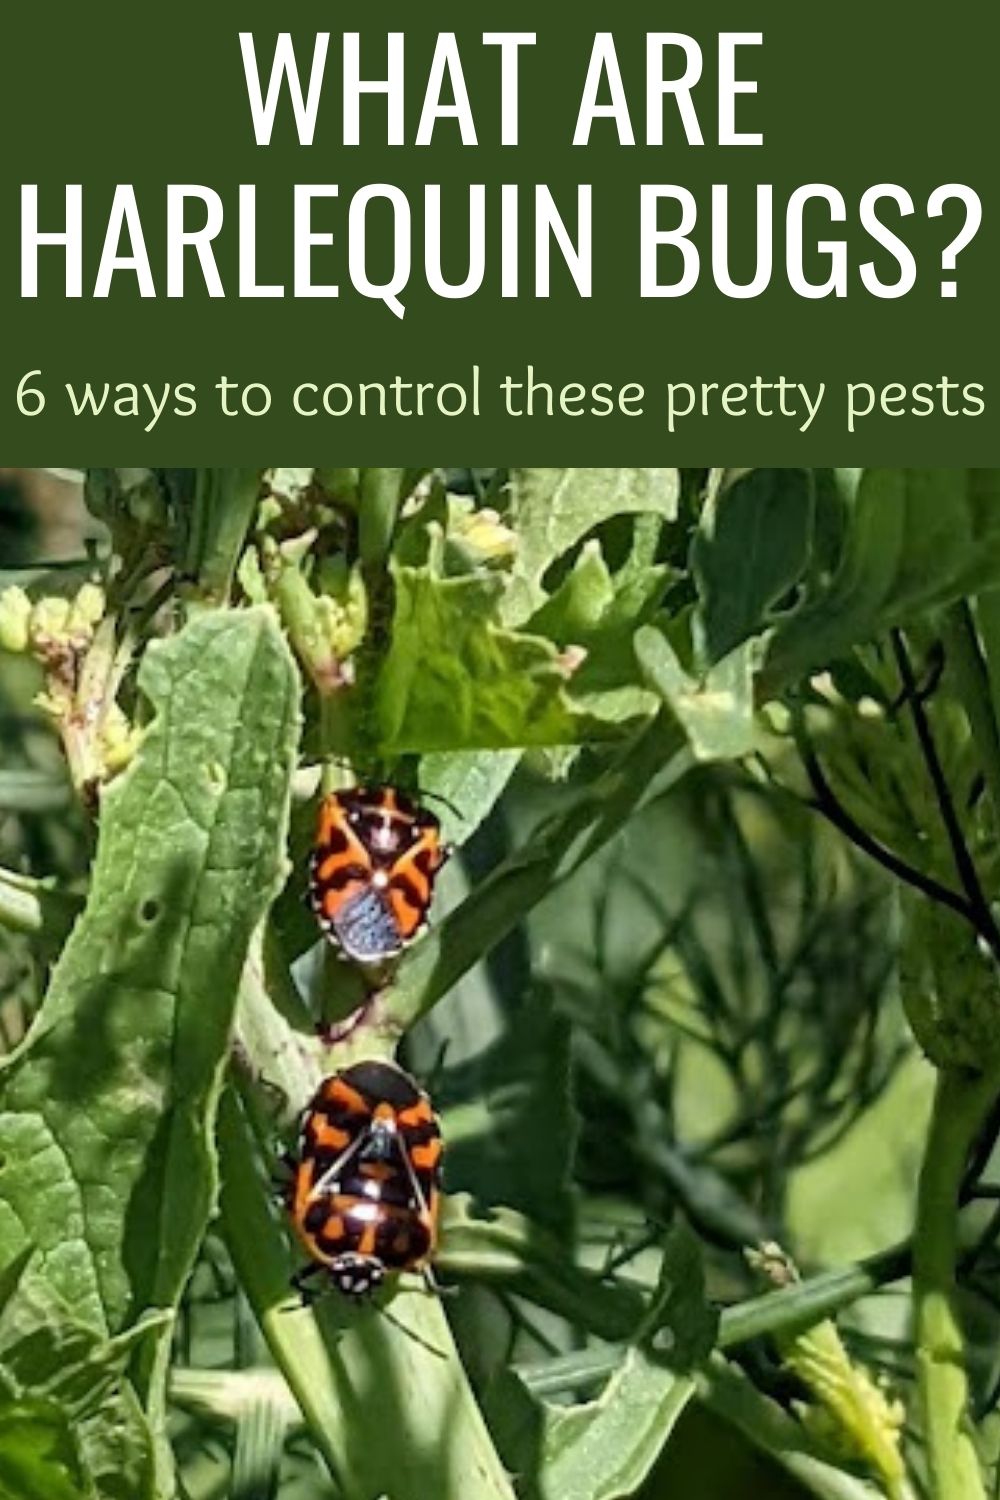 What Are Harlequin Bugs? And 6 Ways to Control These Pretty Pests